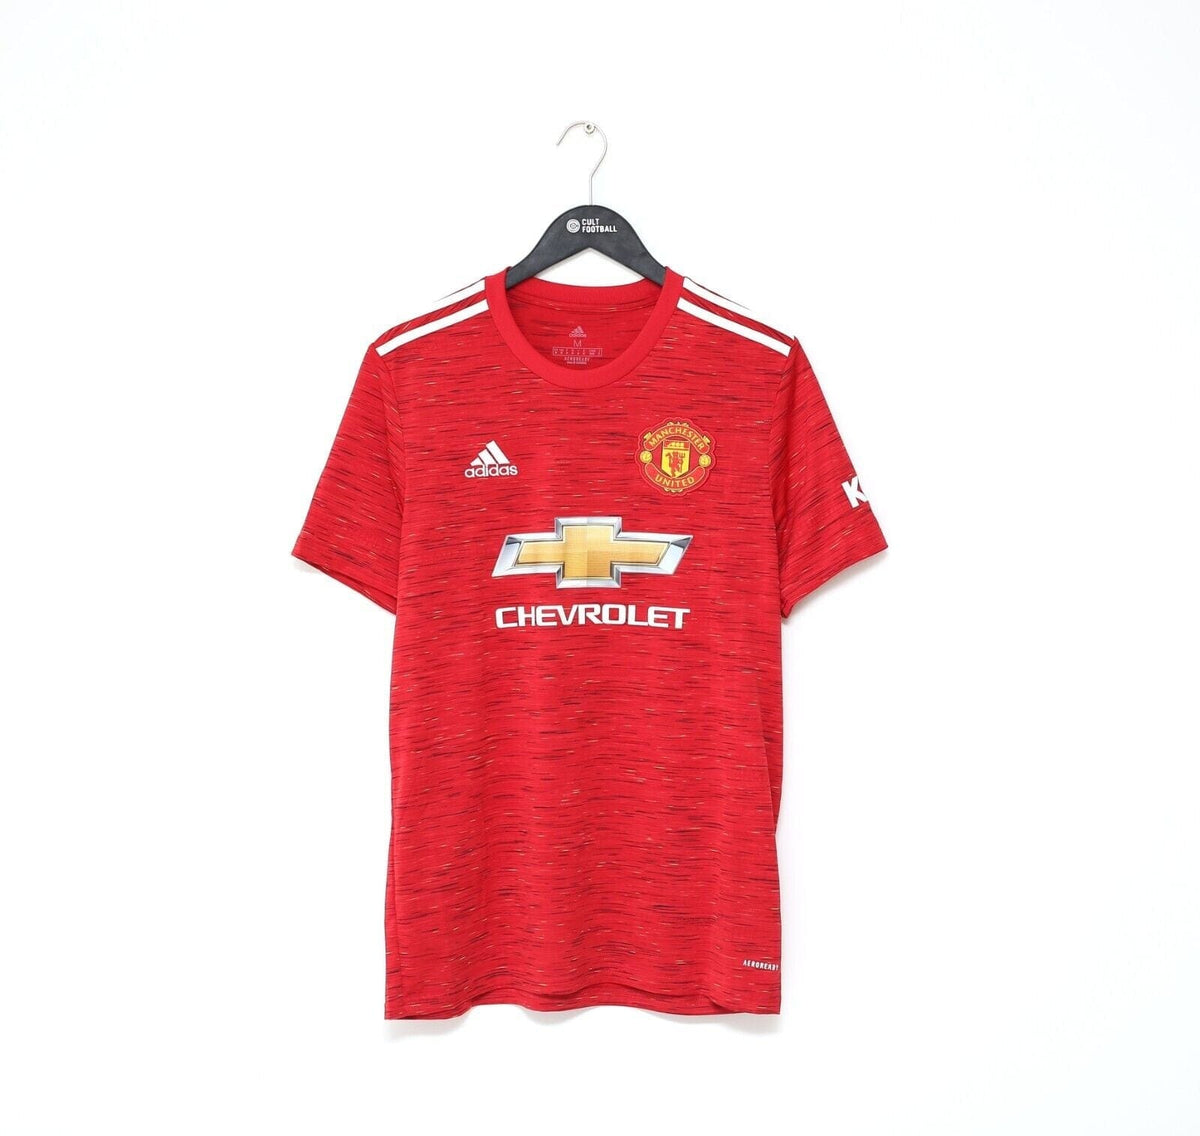 Manchester United 2018 2019 home shirt jersey red CG0040 Adidas S small